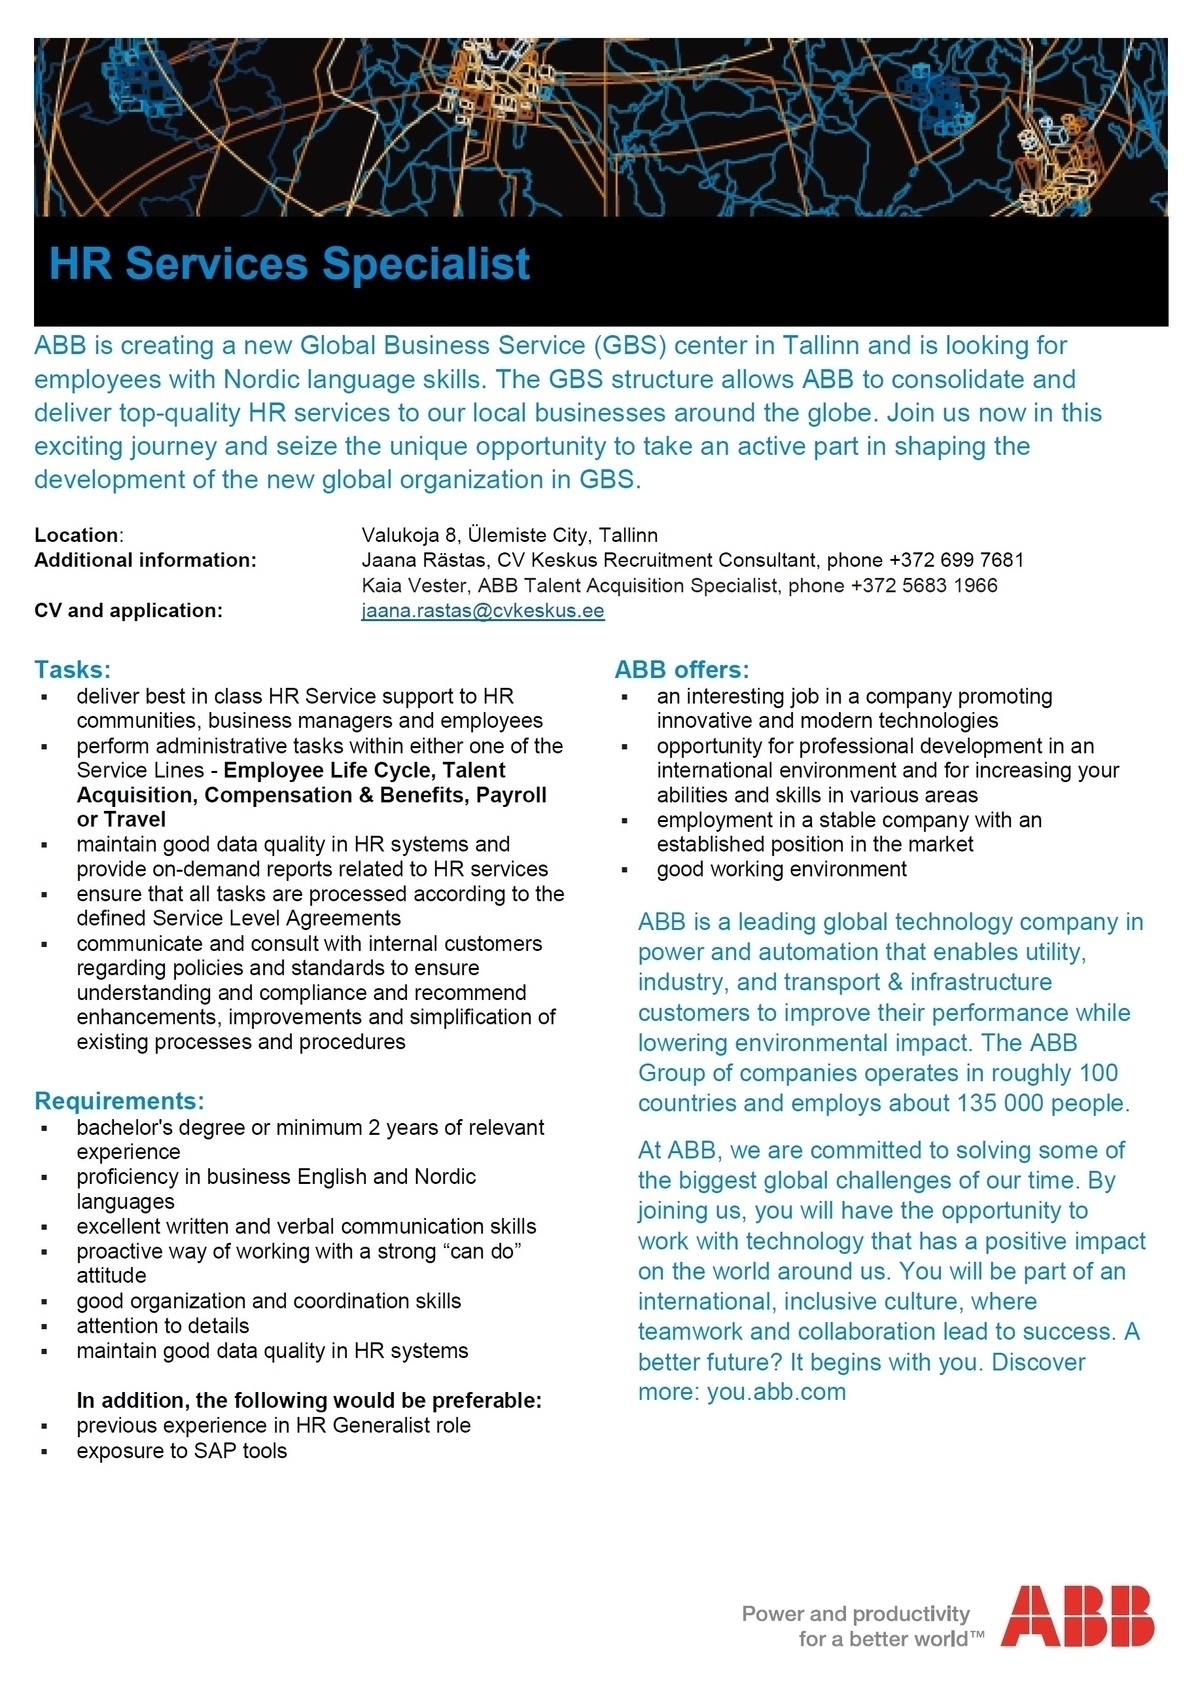 CV KESKUS OÜ ABB is looking for a HR Services Specialist with Scandinavian language skills